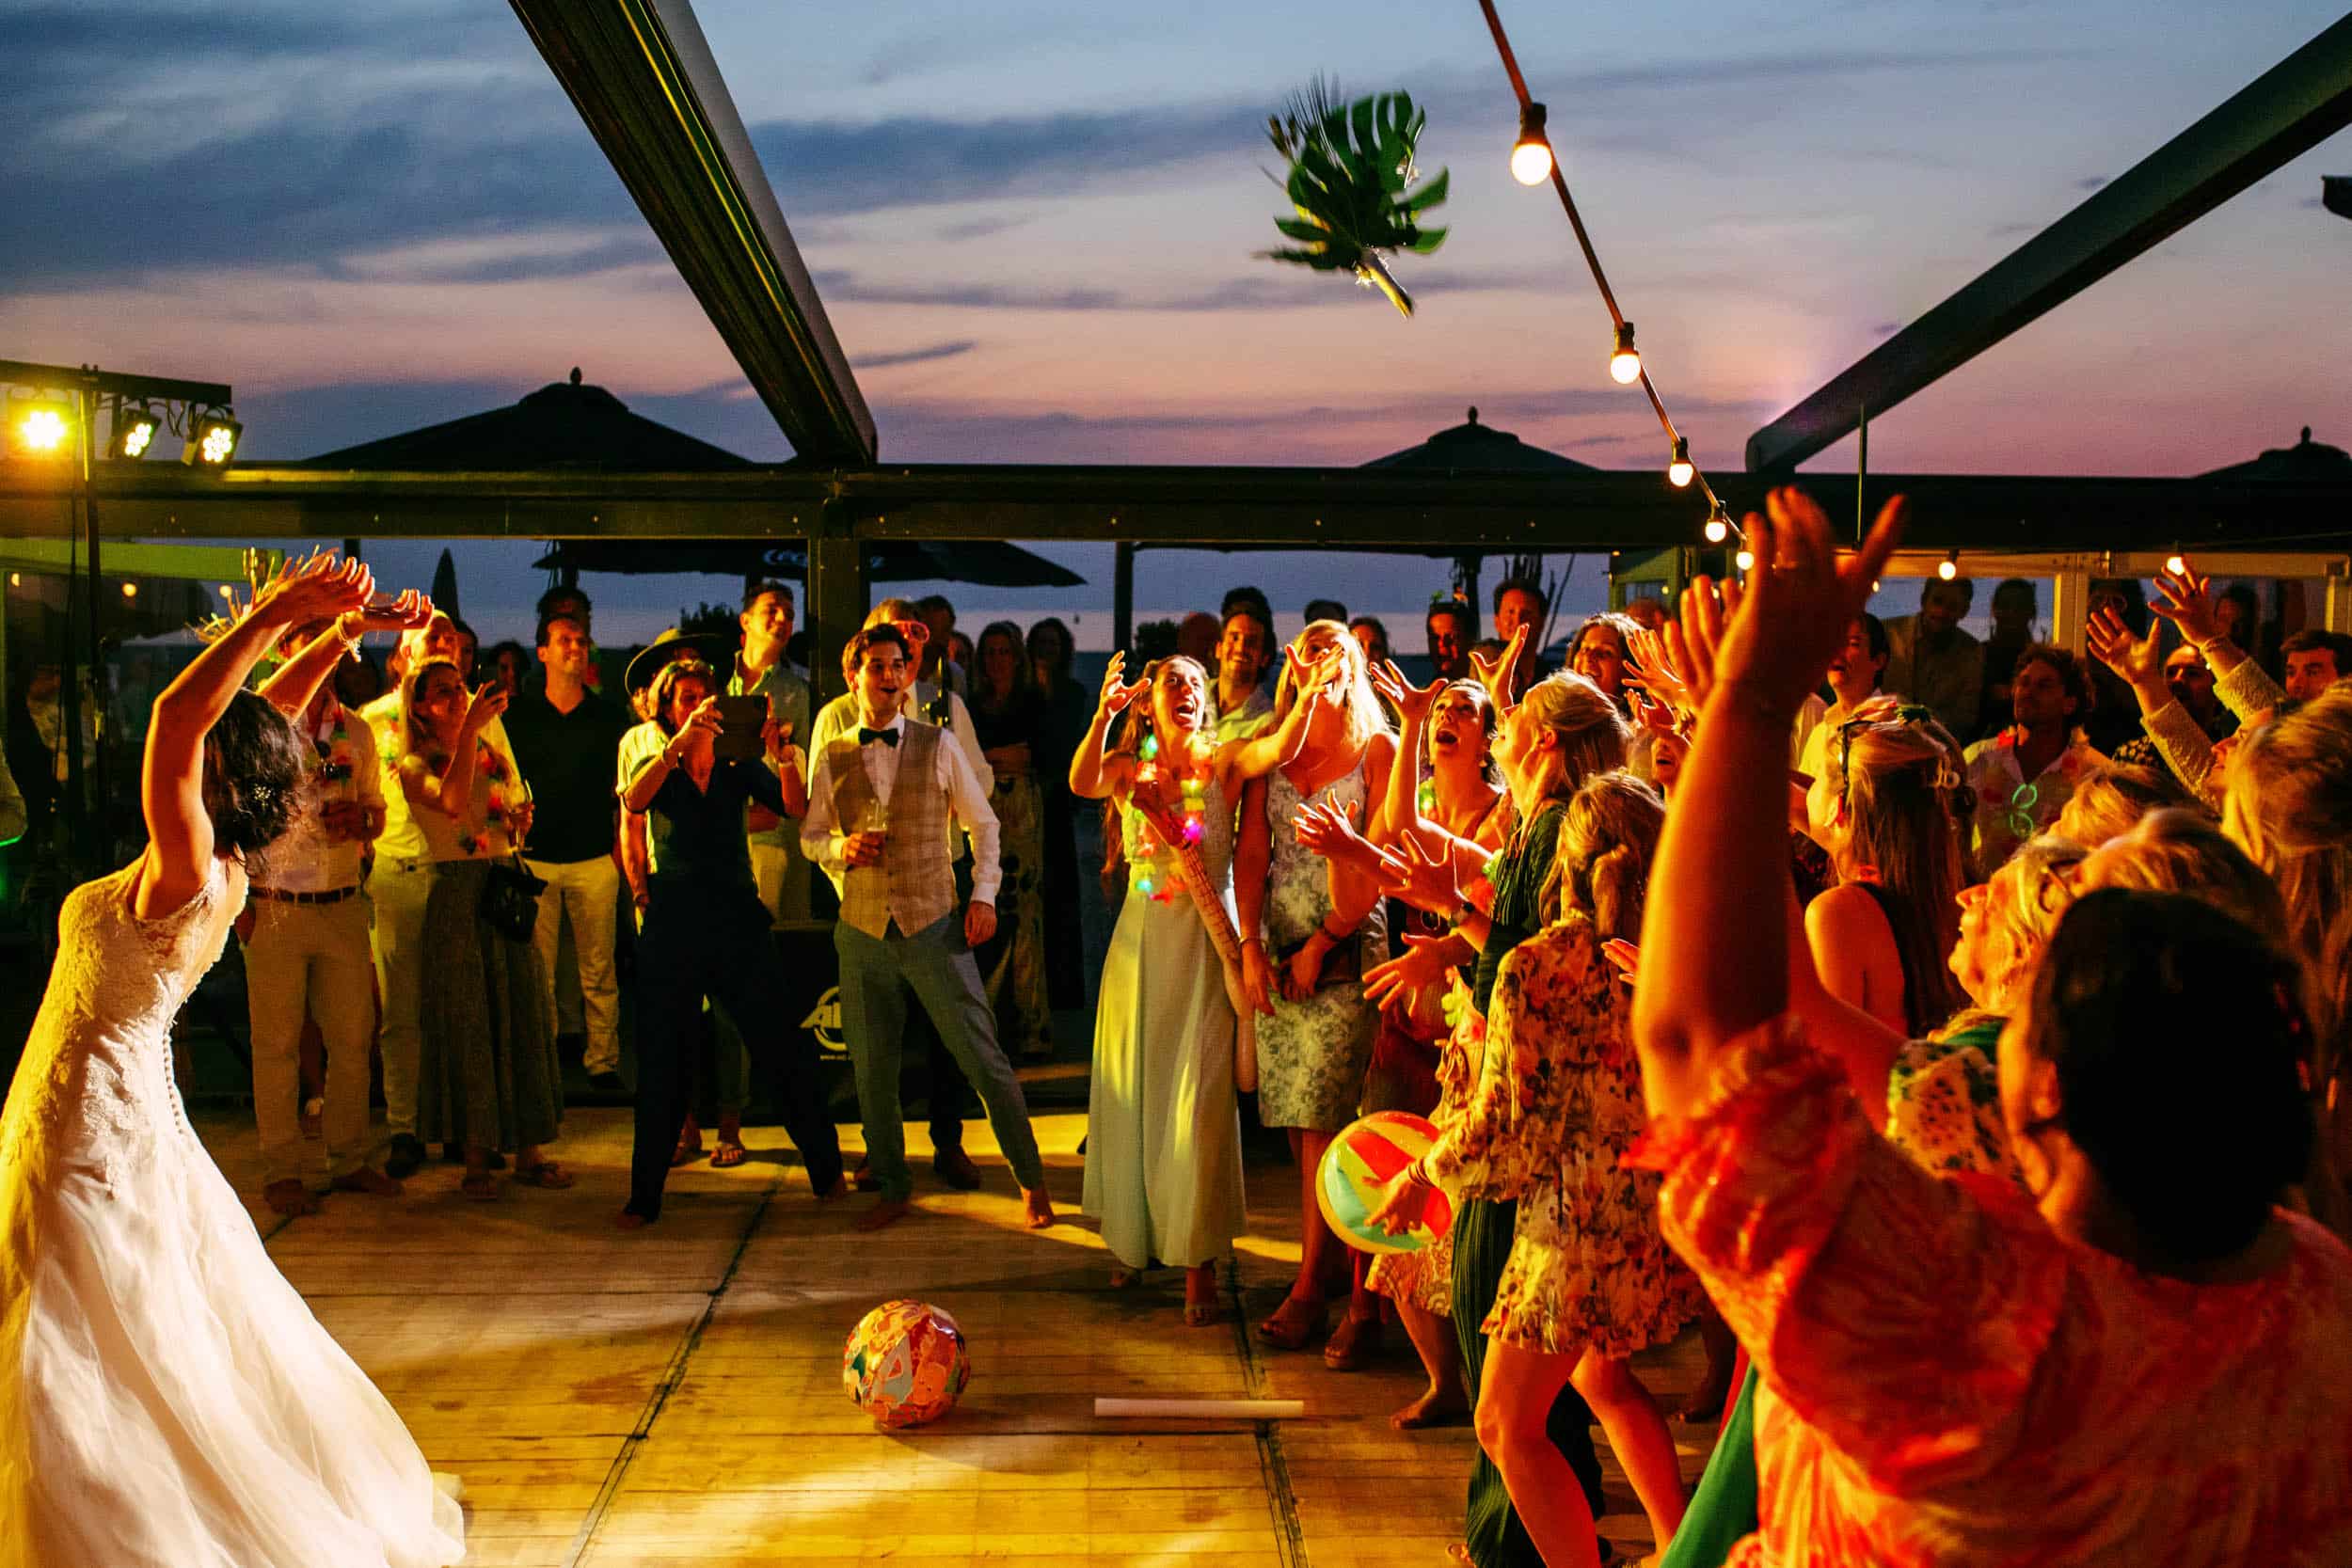 A bride and groom celebrate their marriage by throwing confetti in the air during a beach wedding reception.